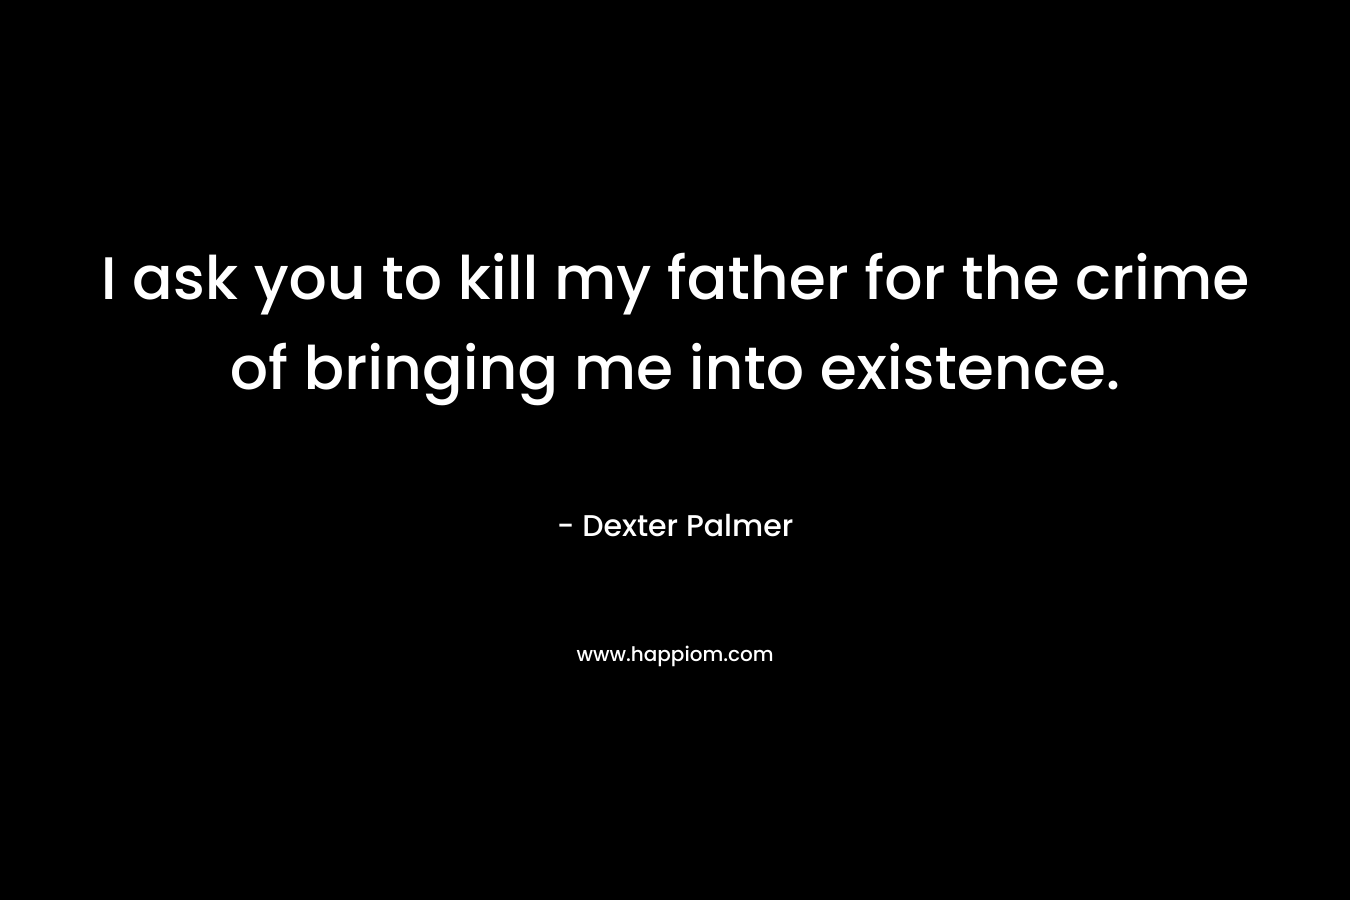 I ask you to kill my father for the crime of bringing me into existence.